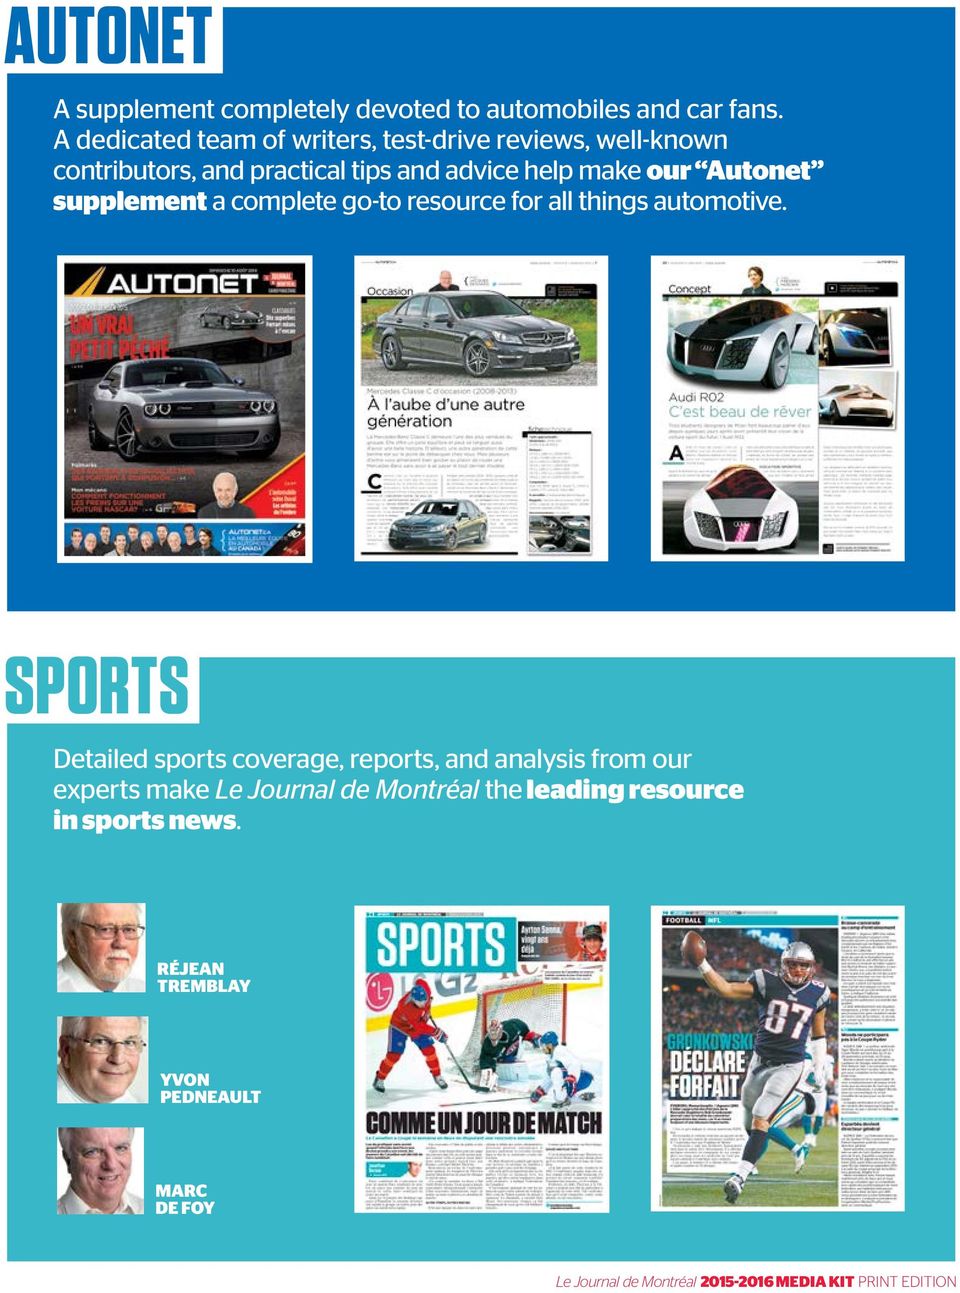 make our Autonet supplement a complete go-to resource for all things automotive.